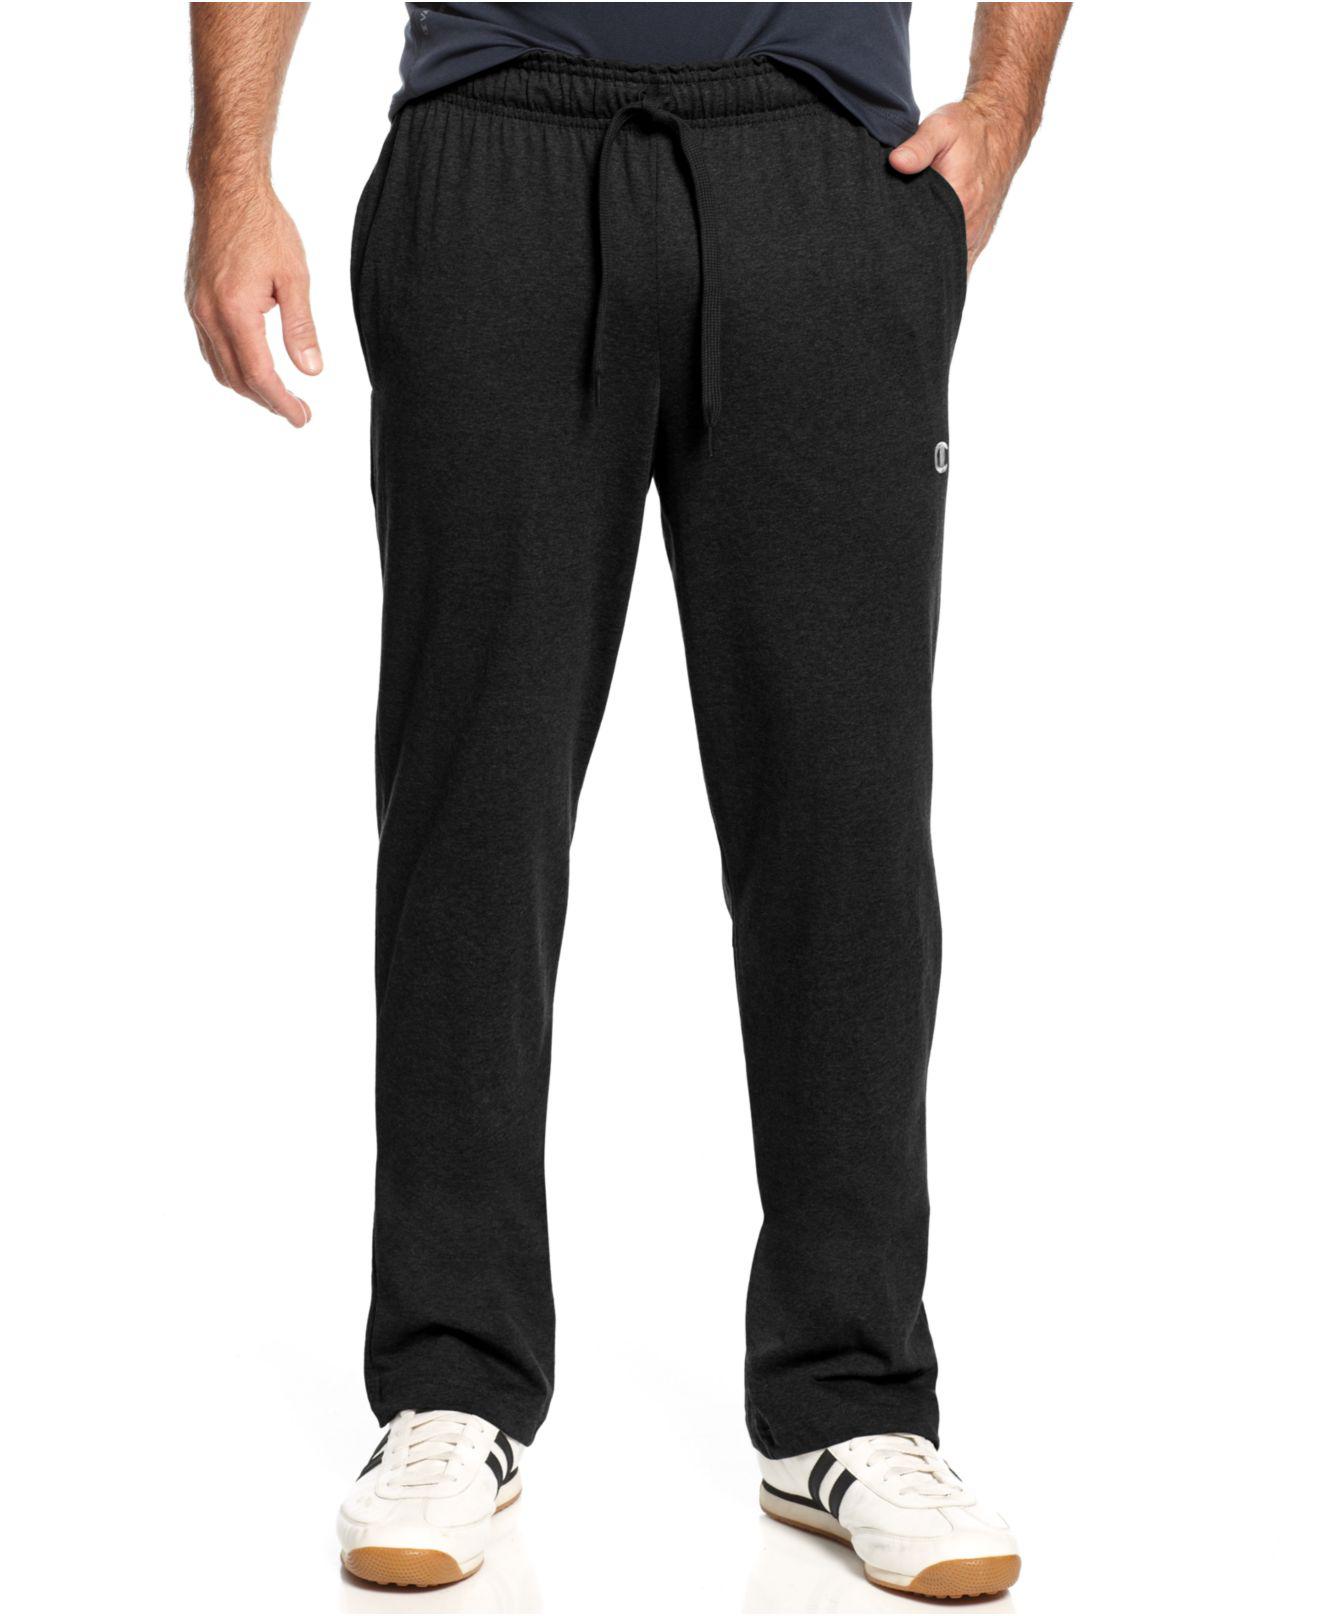 Champion Cotton Jersey Open-bottom Pants in Black for Men - Lyst